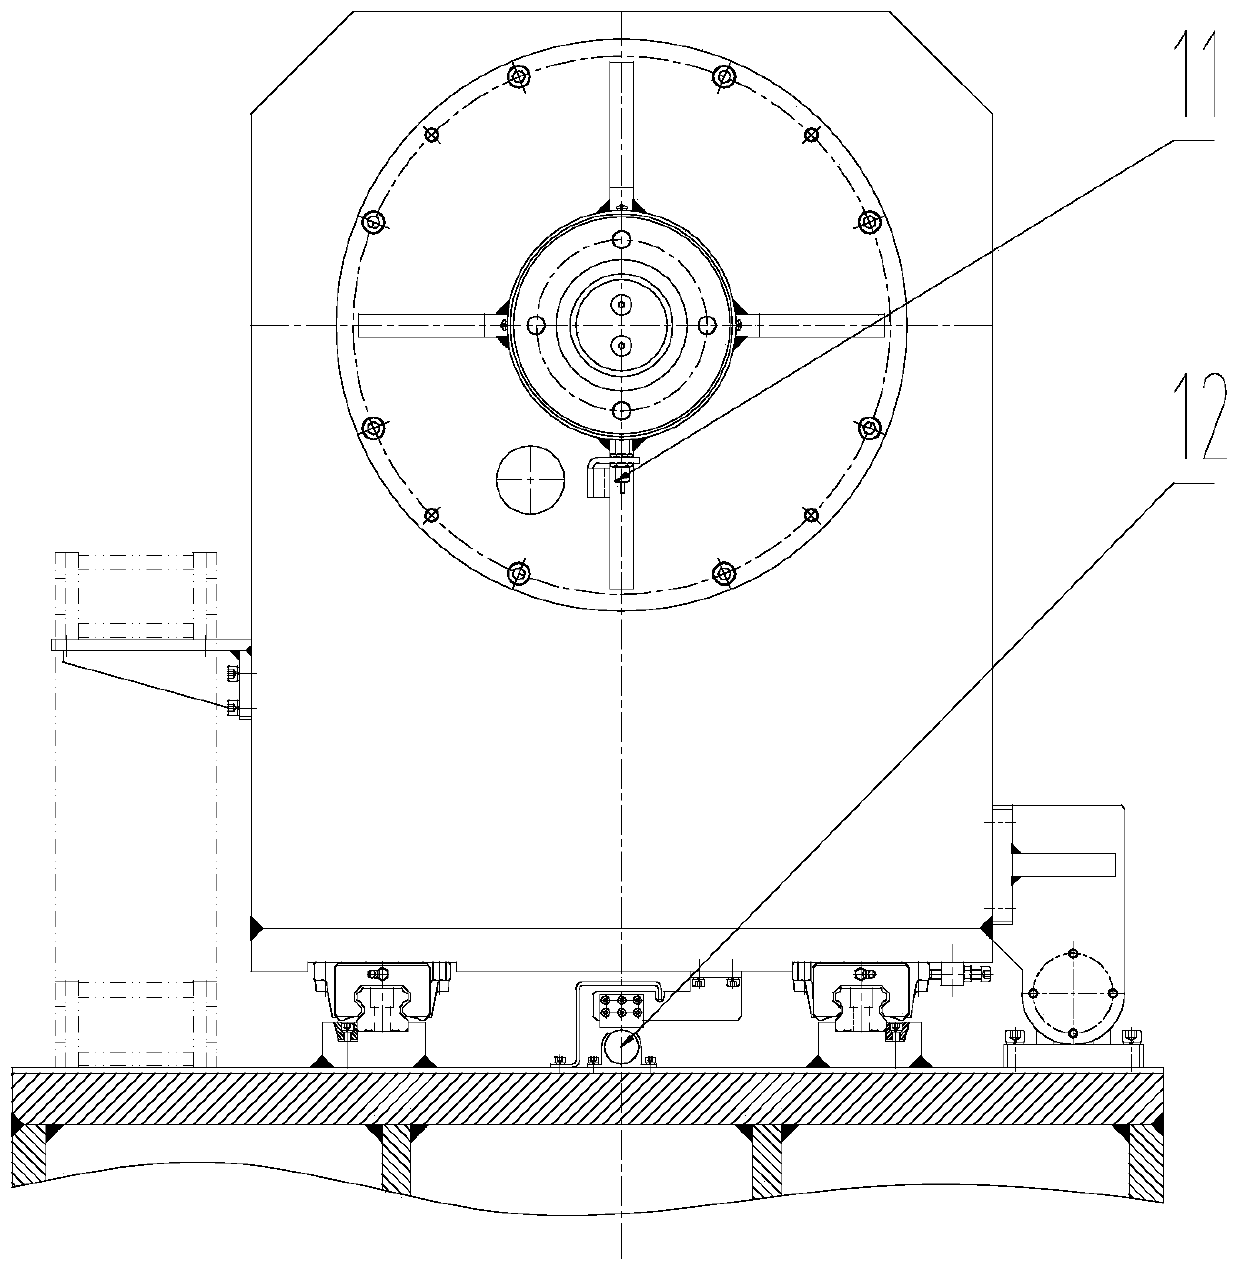 A gearbox no-load test inertial loading mechanism